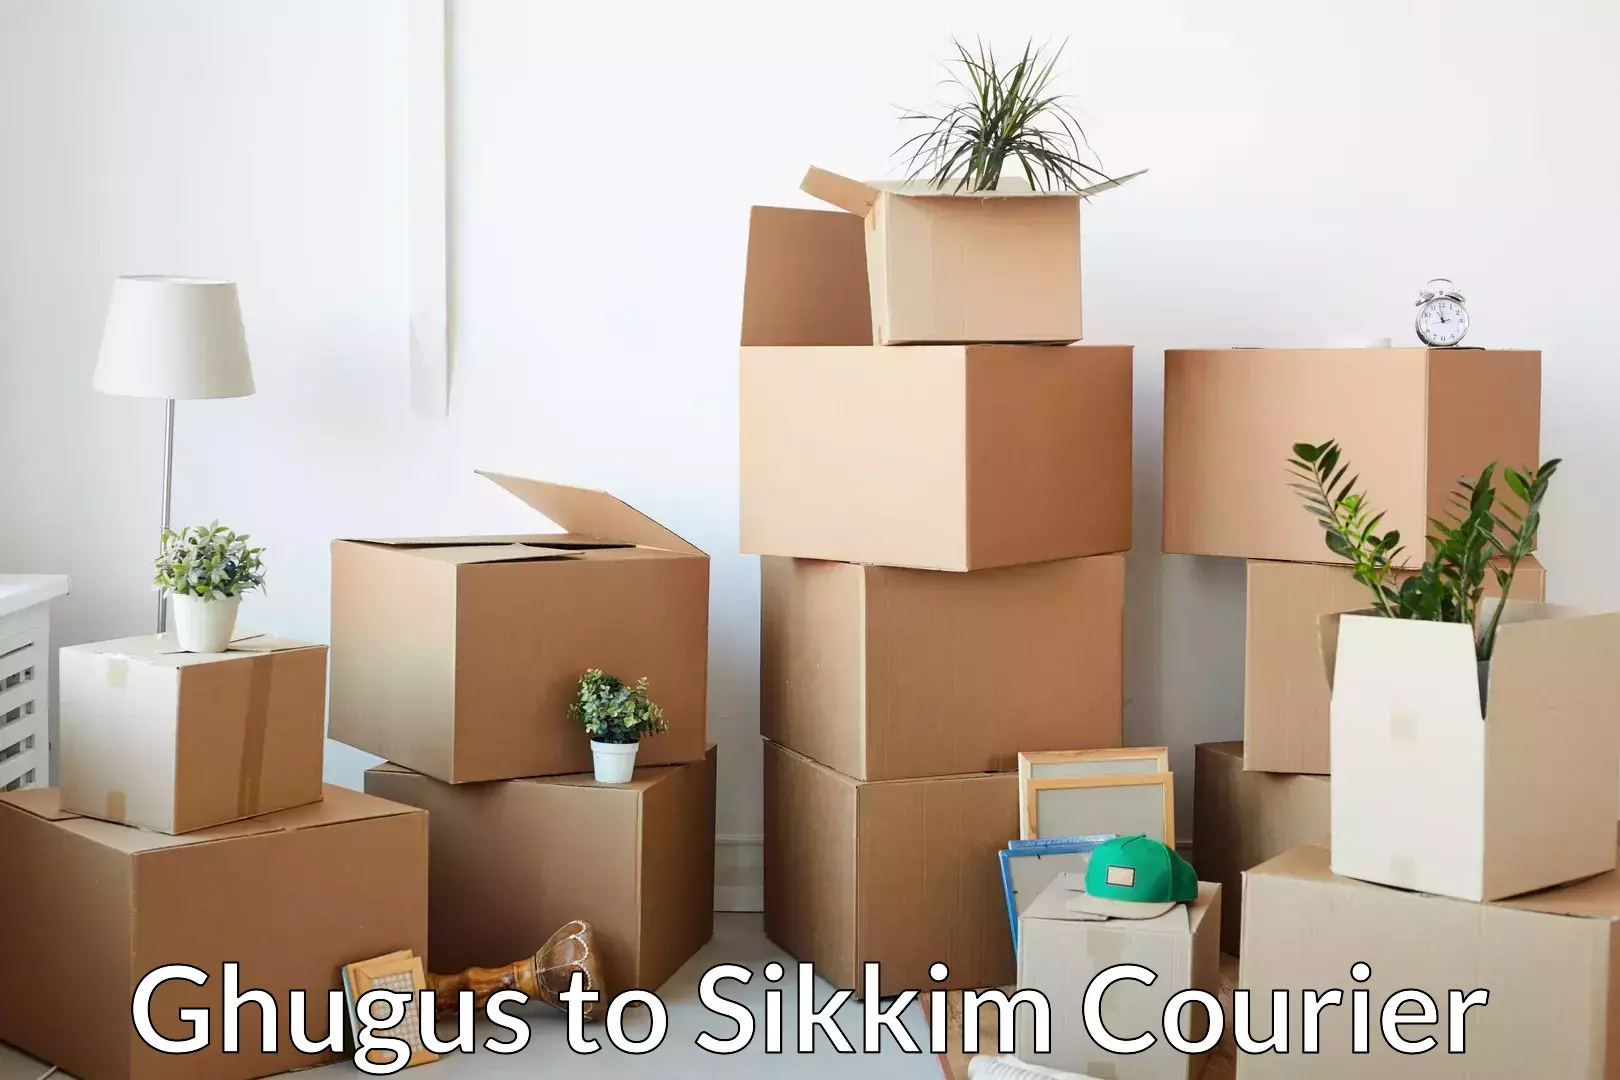 Specialized moving company Ghugus to Sikkim